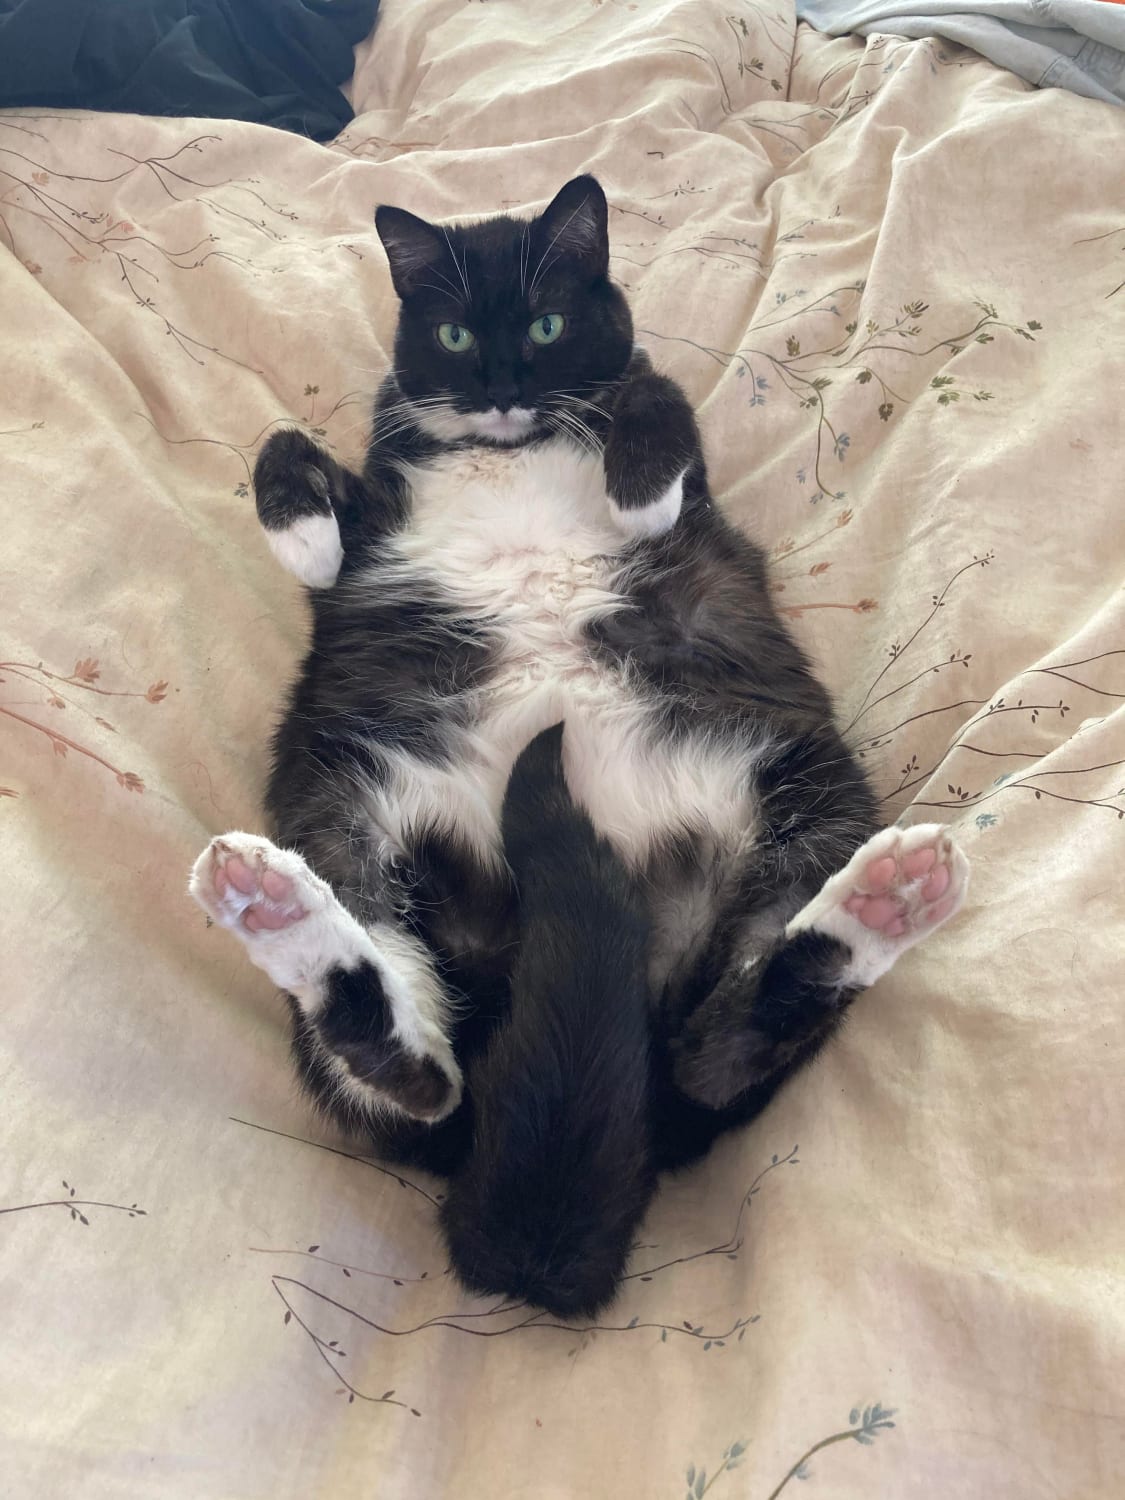 Mittens is Chonk on her back